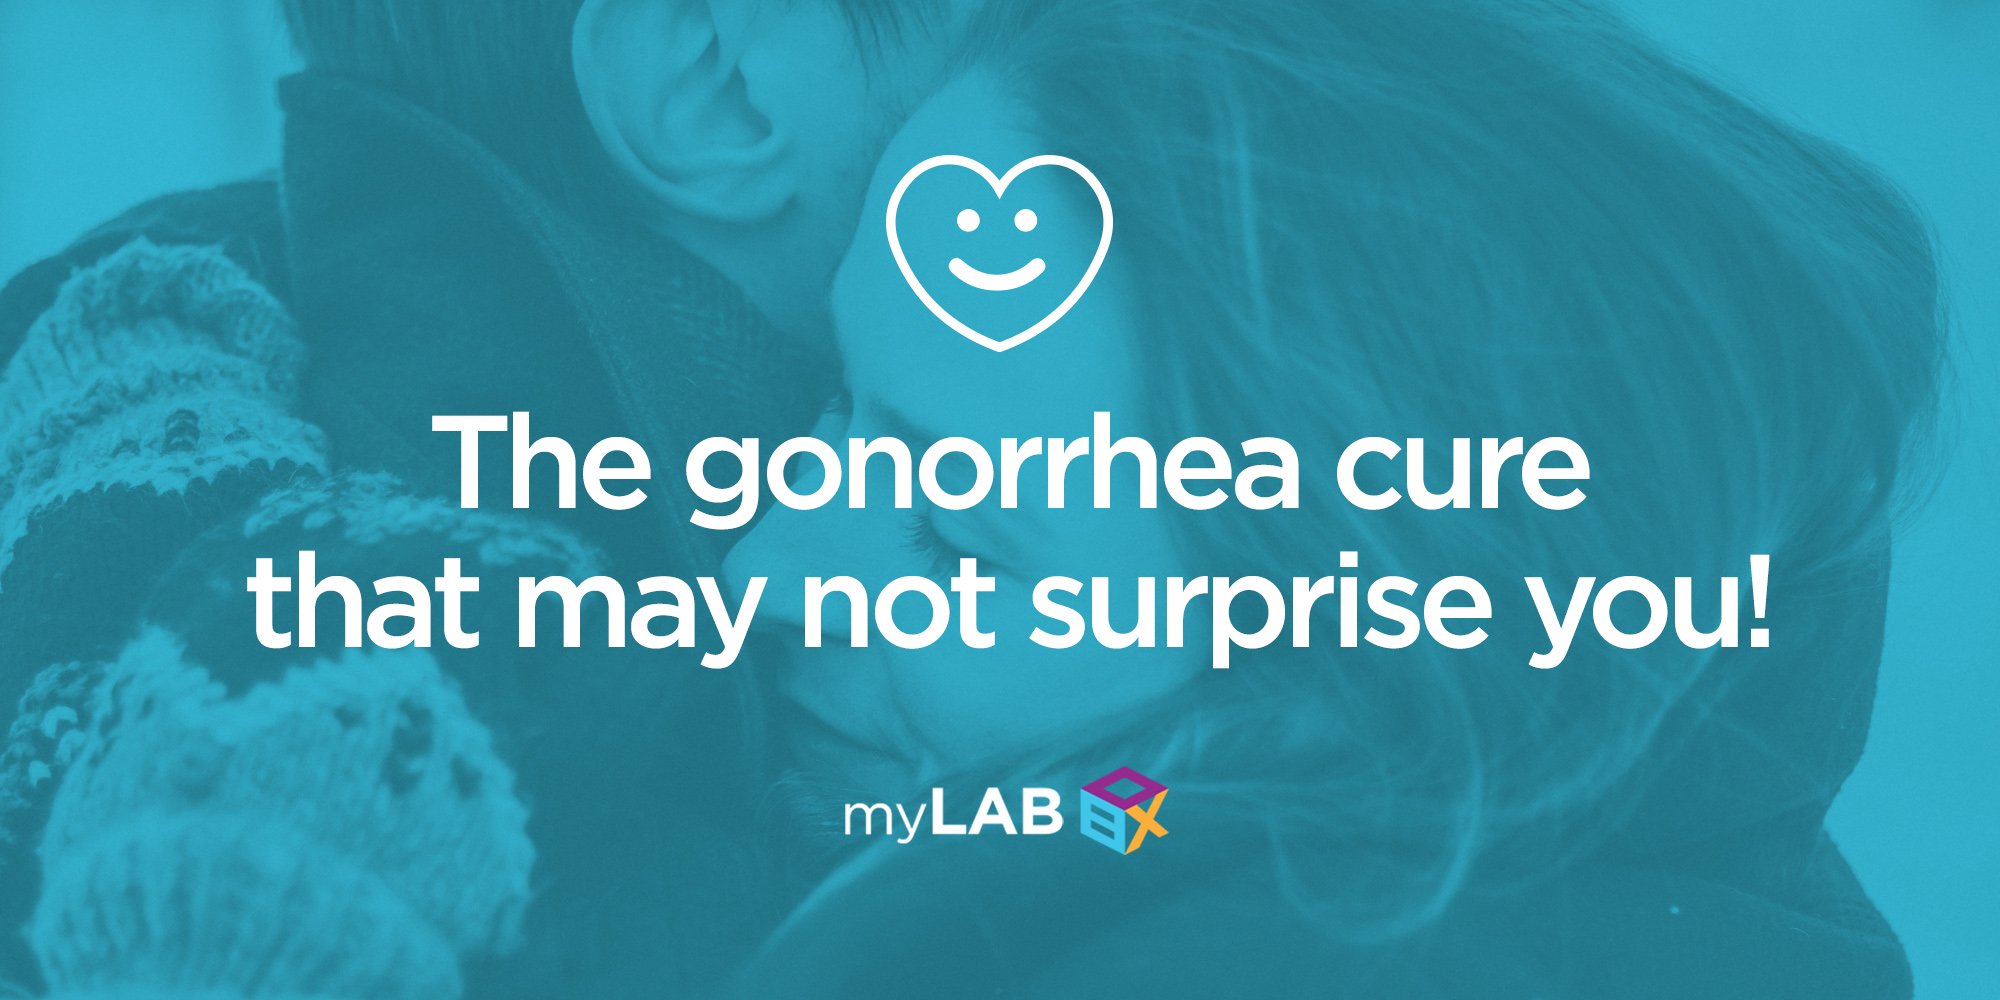 The Gonorrhea Cure That May Not Surprise You